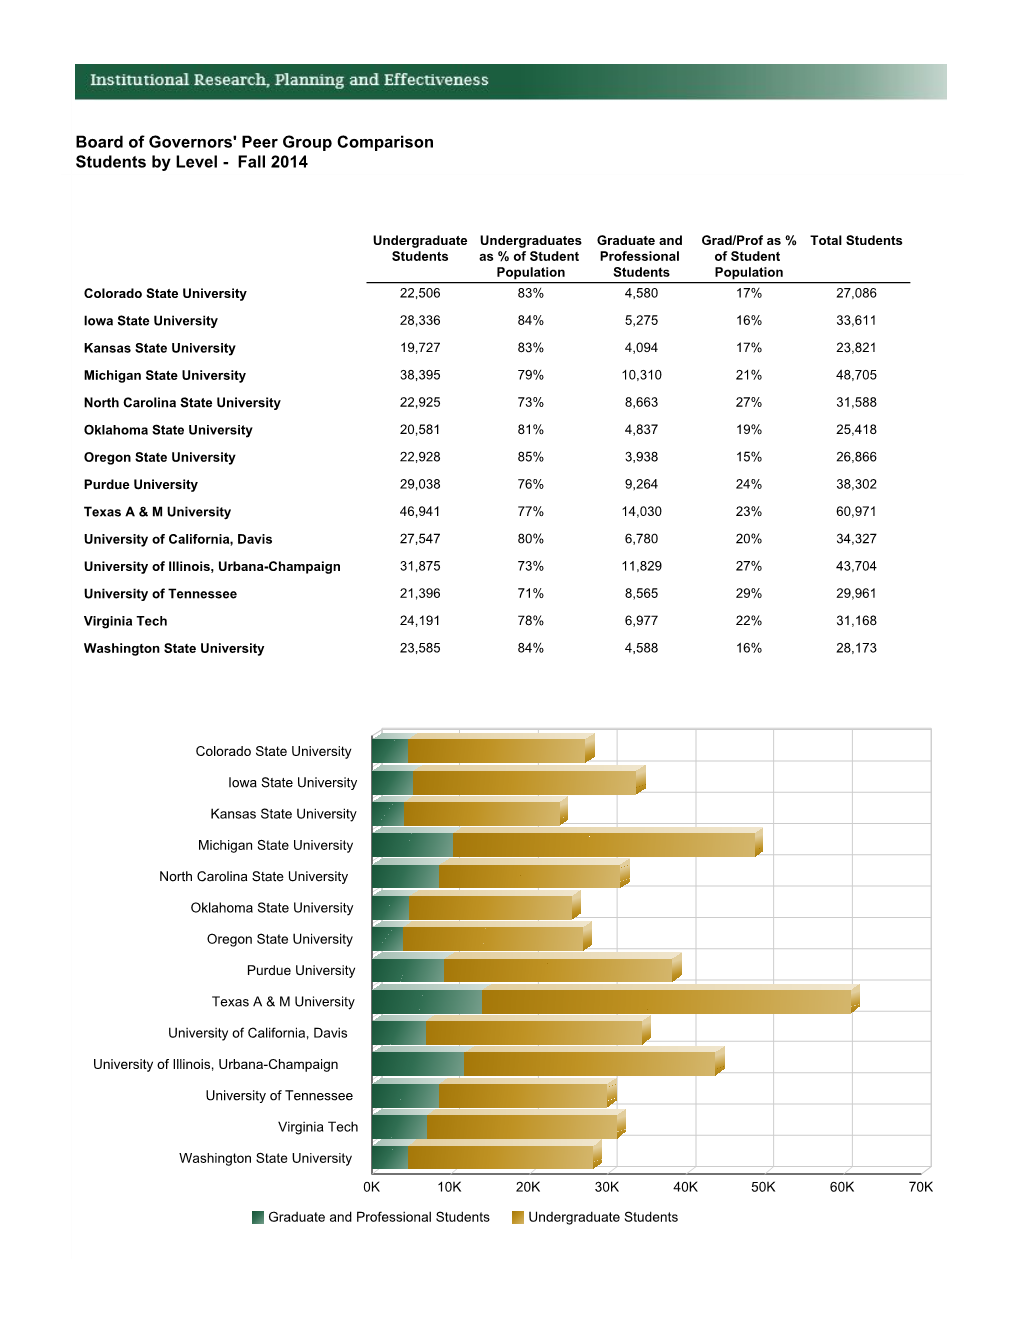 Board of Governors' Peer Group Comparison Students by Level - Fall 2014